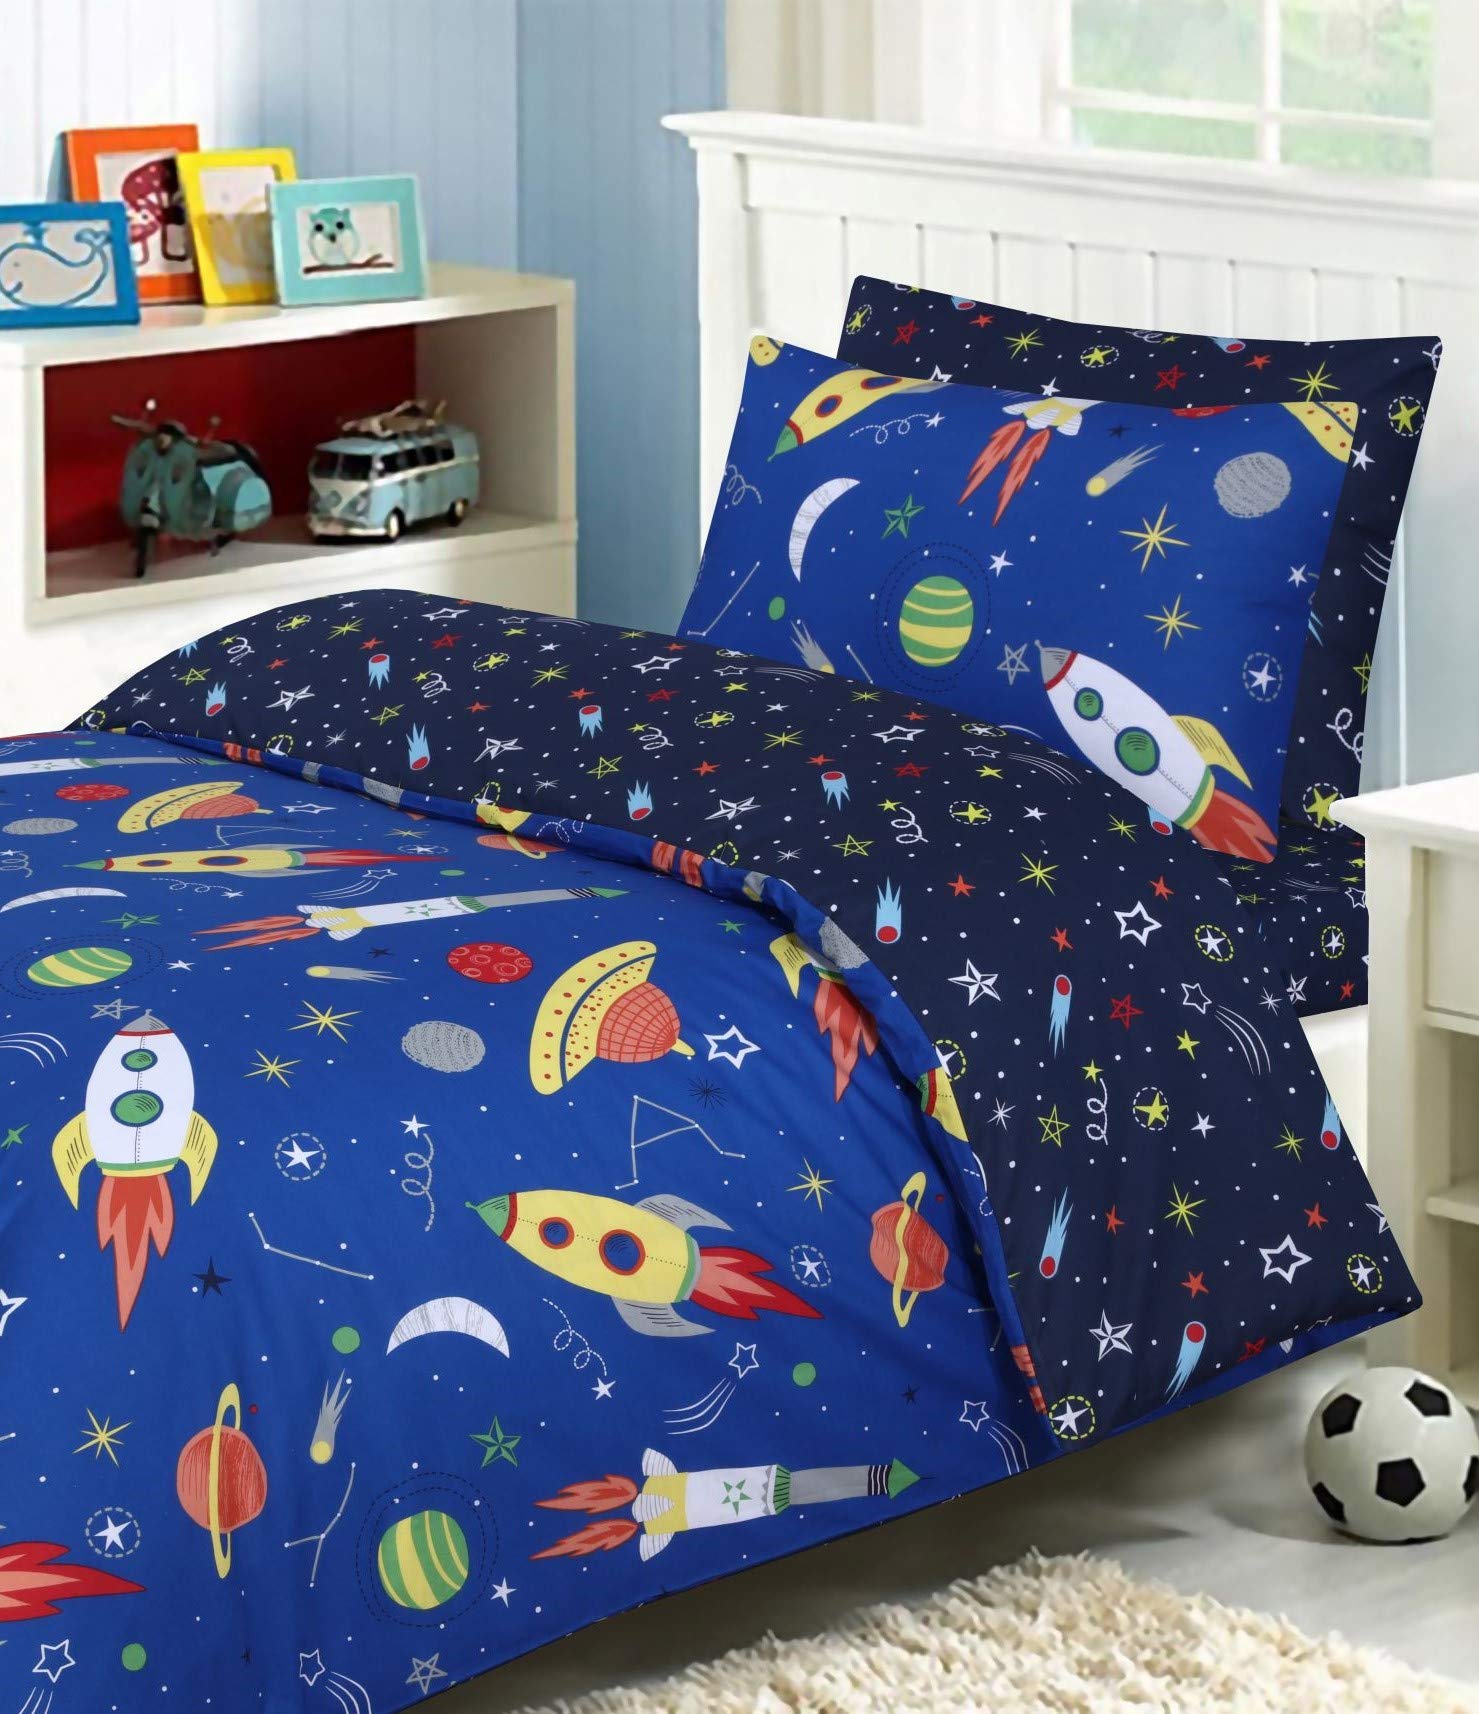 Divine Textiles - 100% Cotton Kids Childrens Bedding Set Reversible Duvet Cover With Pillowcases and Matching Fitted Sheet, Space Blue - Single Complete Set